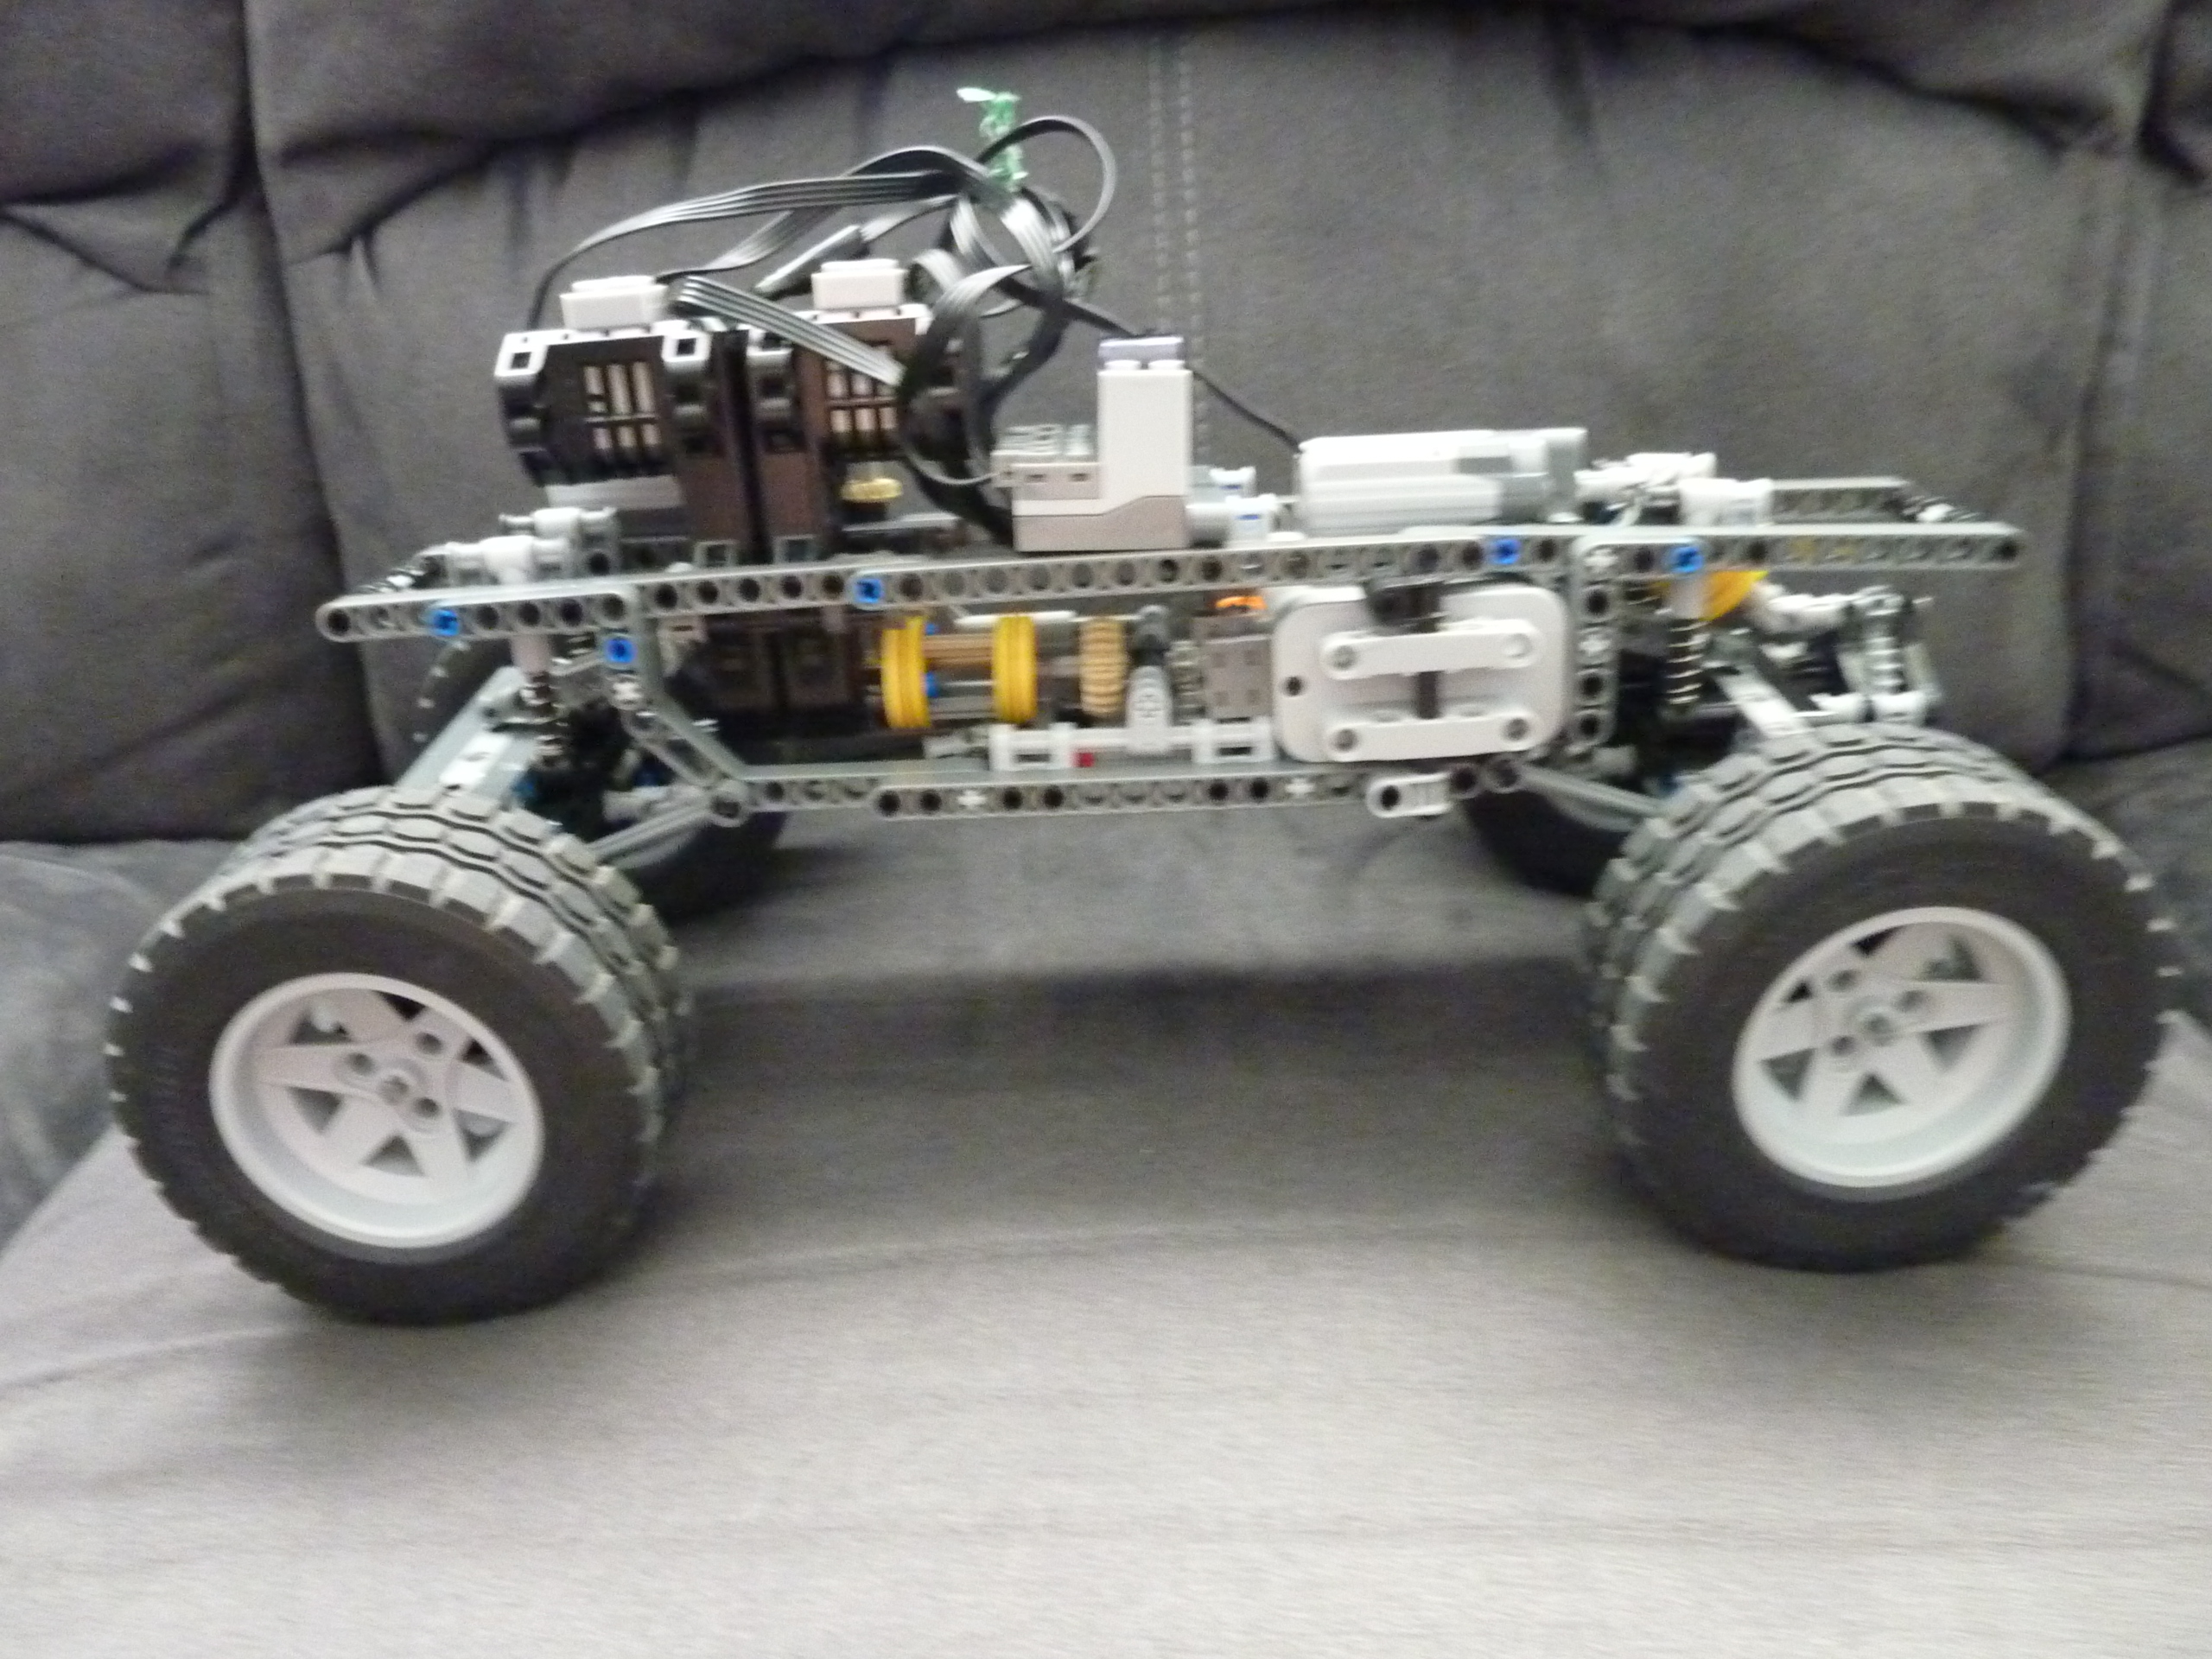 Lego RC Trial Buggy With 2-Speed Transmission LEGO Technic, Mindstorms, Model Scale Modeling - Eurobricks Forums